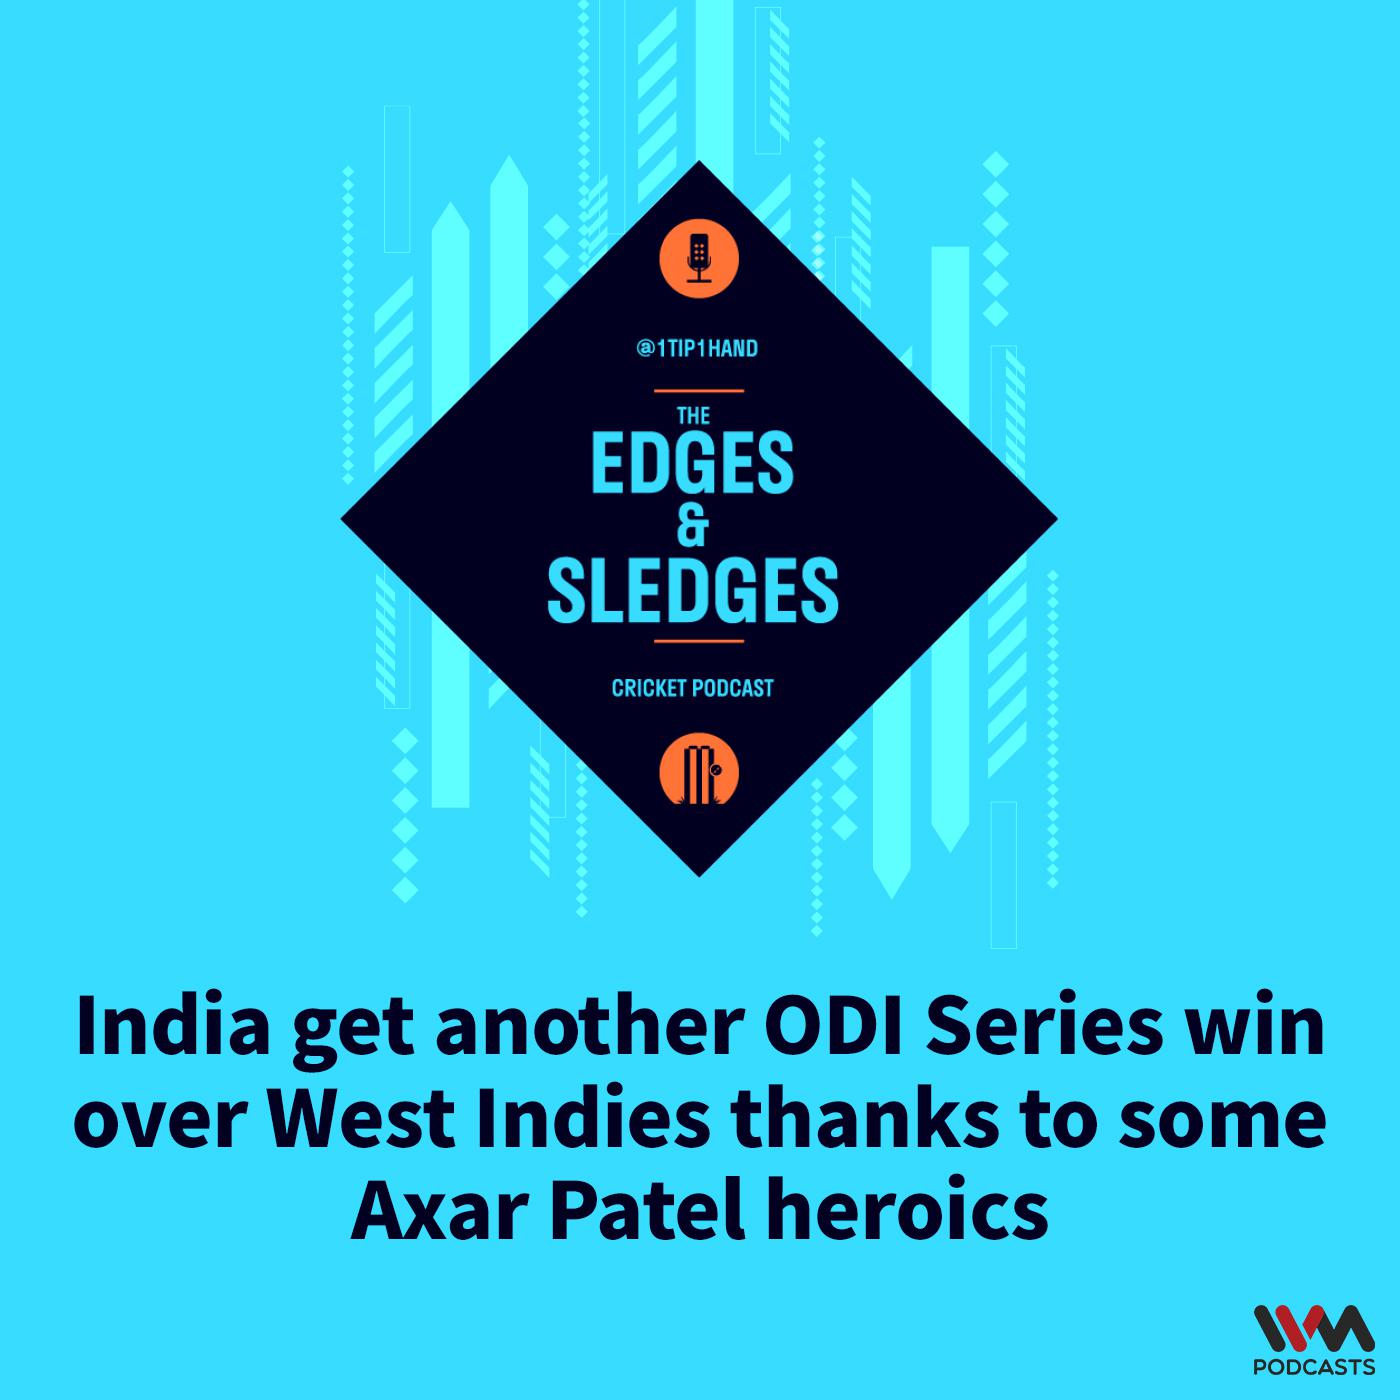 India get another ODI Series win over West Indies thanks to some Axar Patel heroics